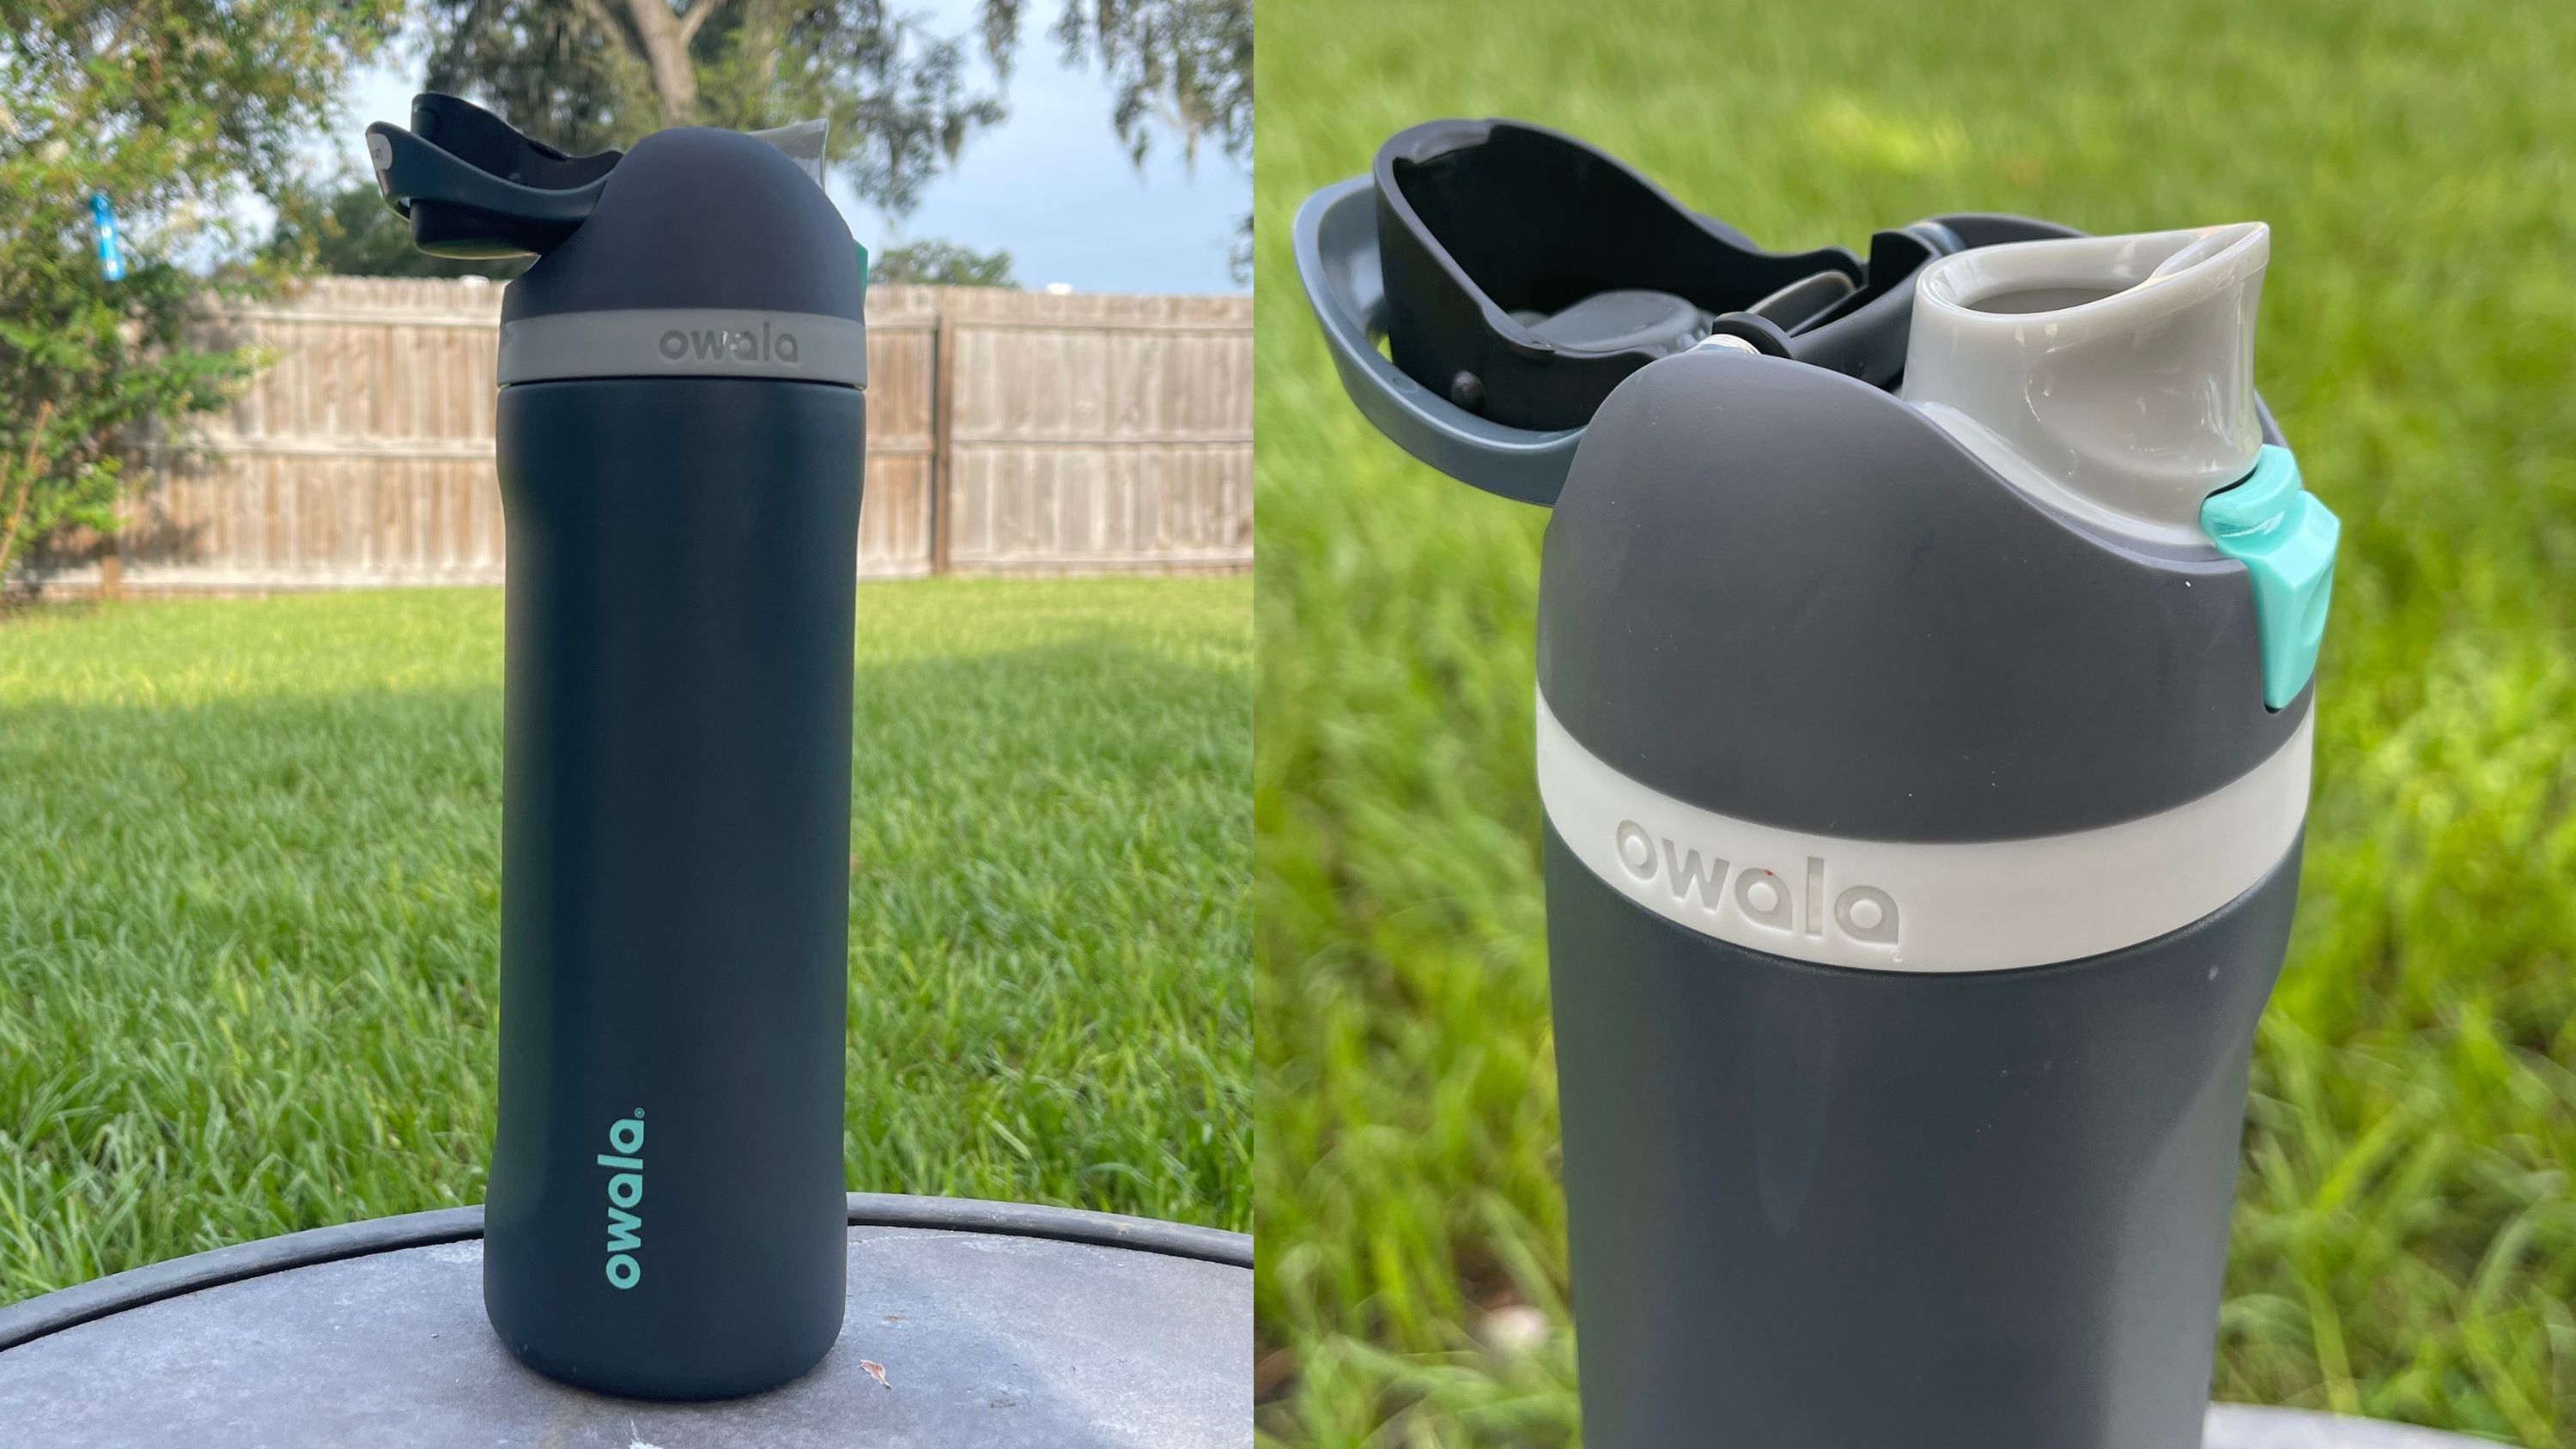 A side by side of the full Owala FreeSip bottle sitting outdoors next to another image of an up close look of the Owala FreeSip